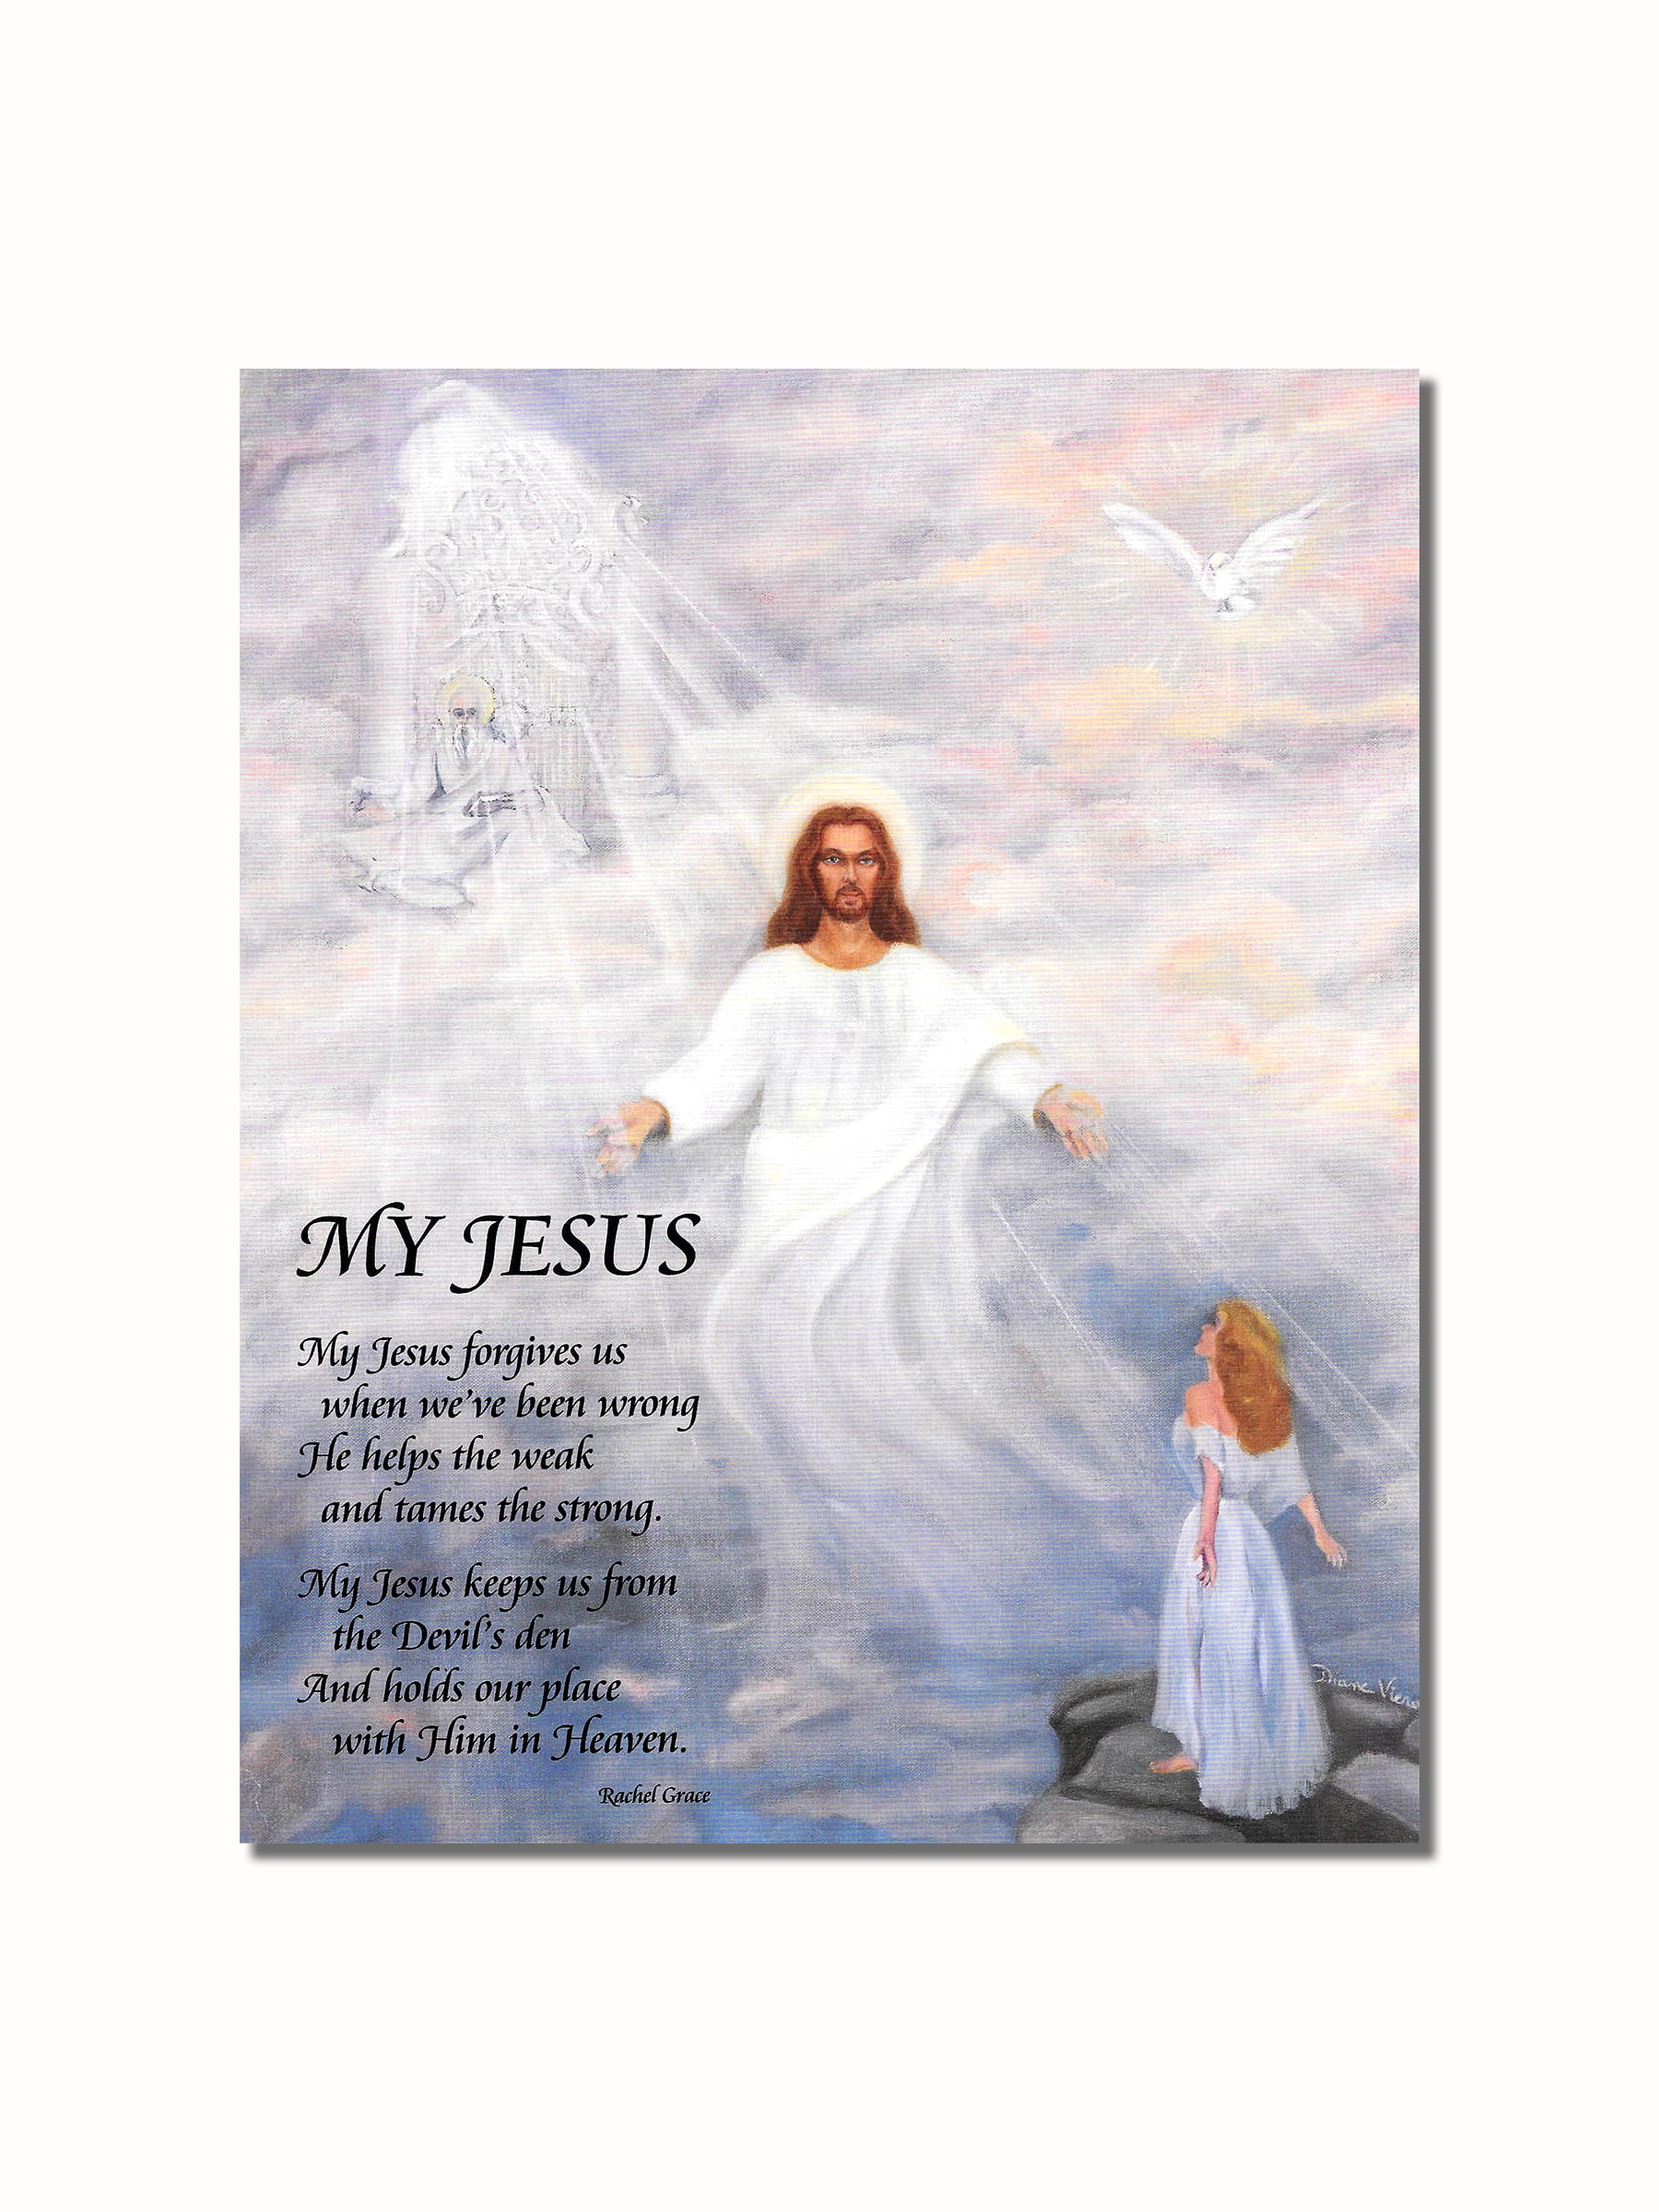 A Jesus Walking On Water 8x10 Picture Celebrity Print 